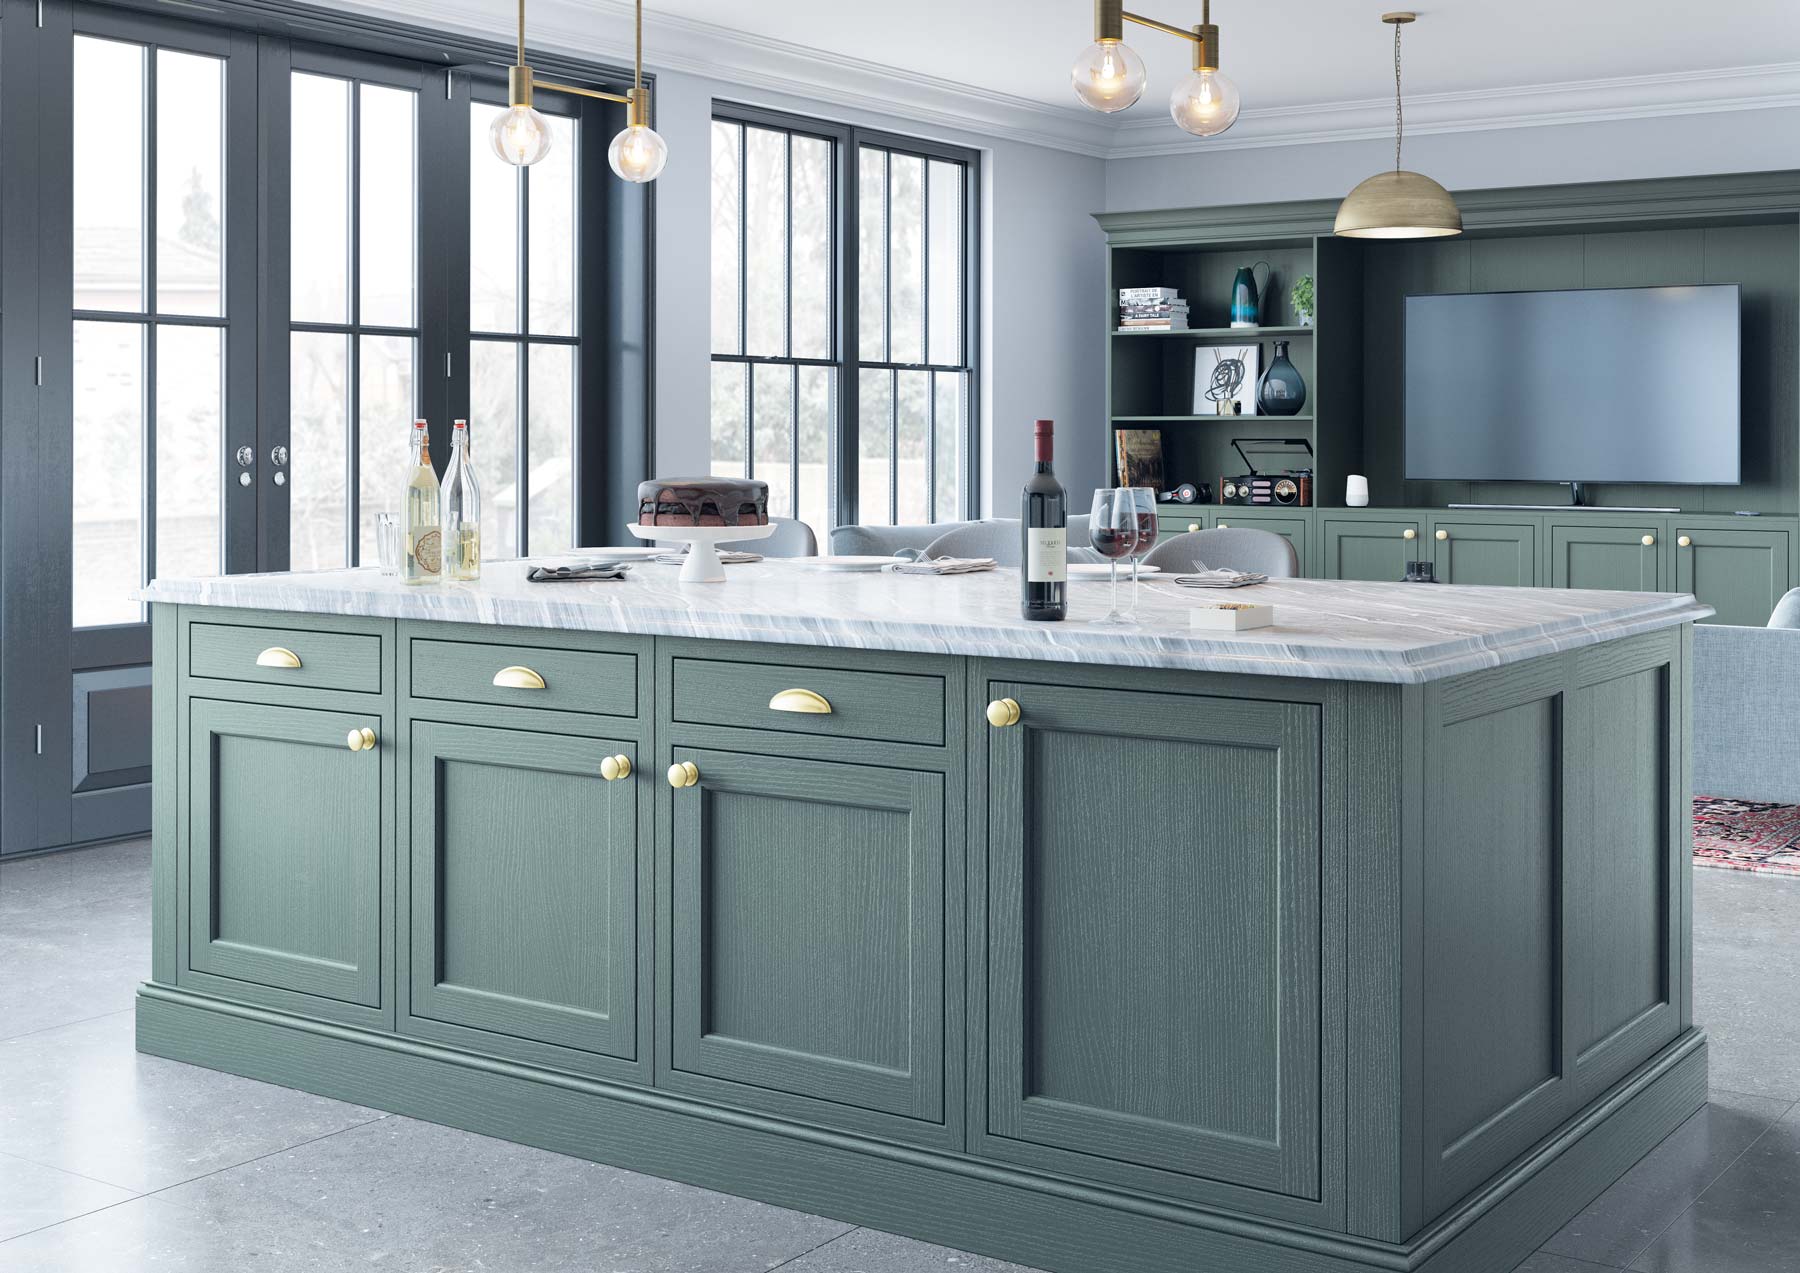 How do In-Frame Kitchens Compare to Shaker Style Kitchens?